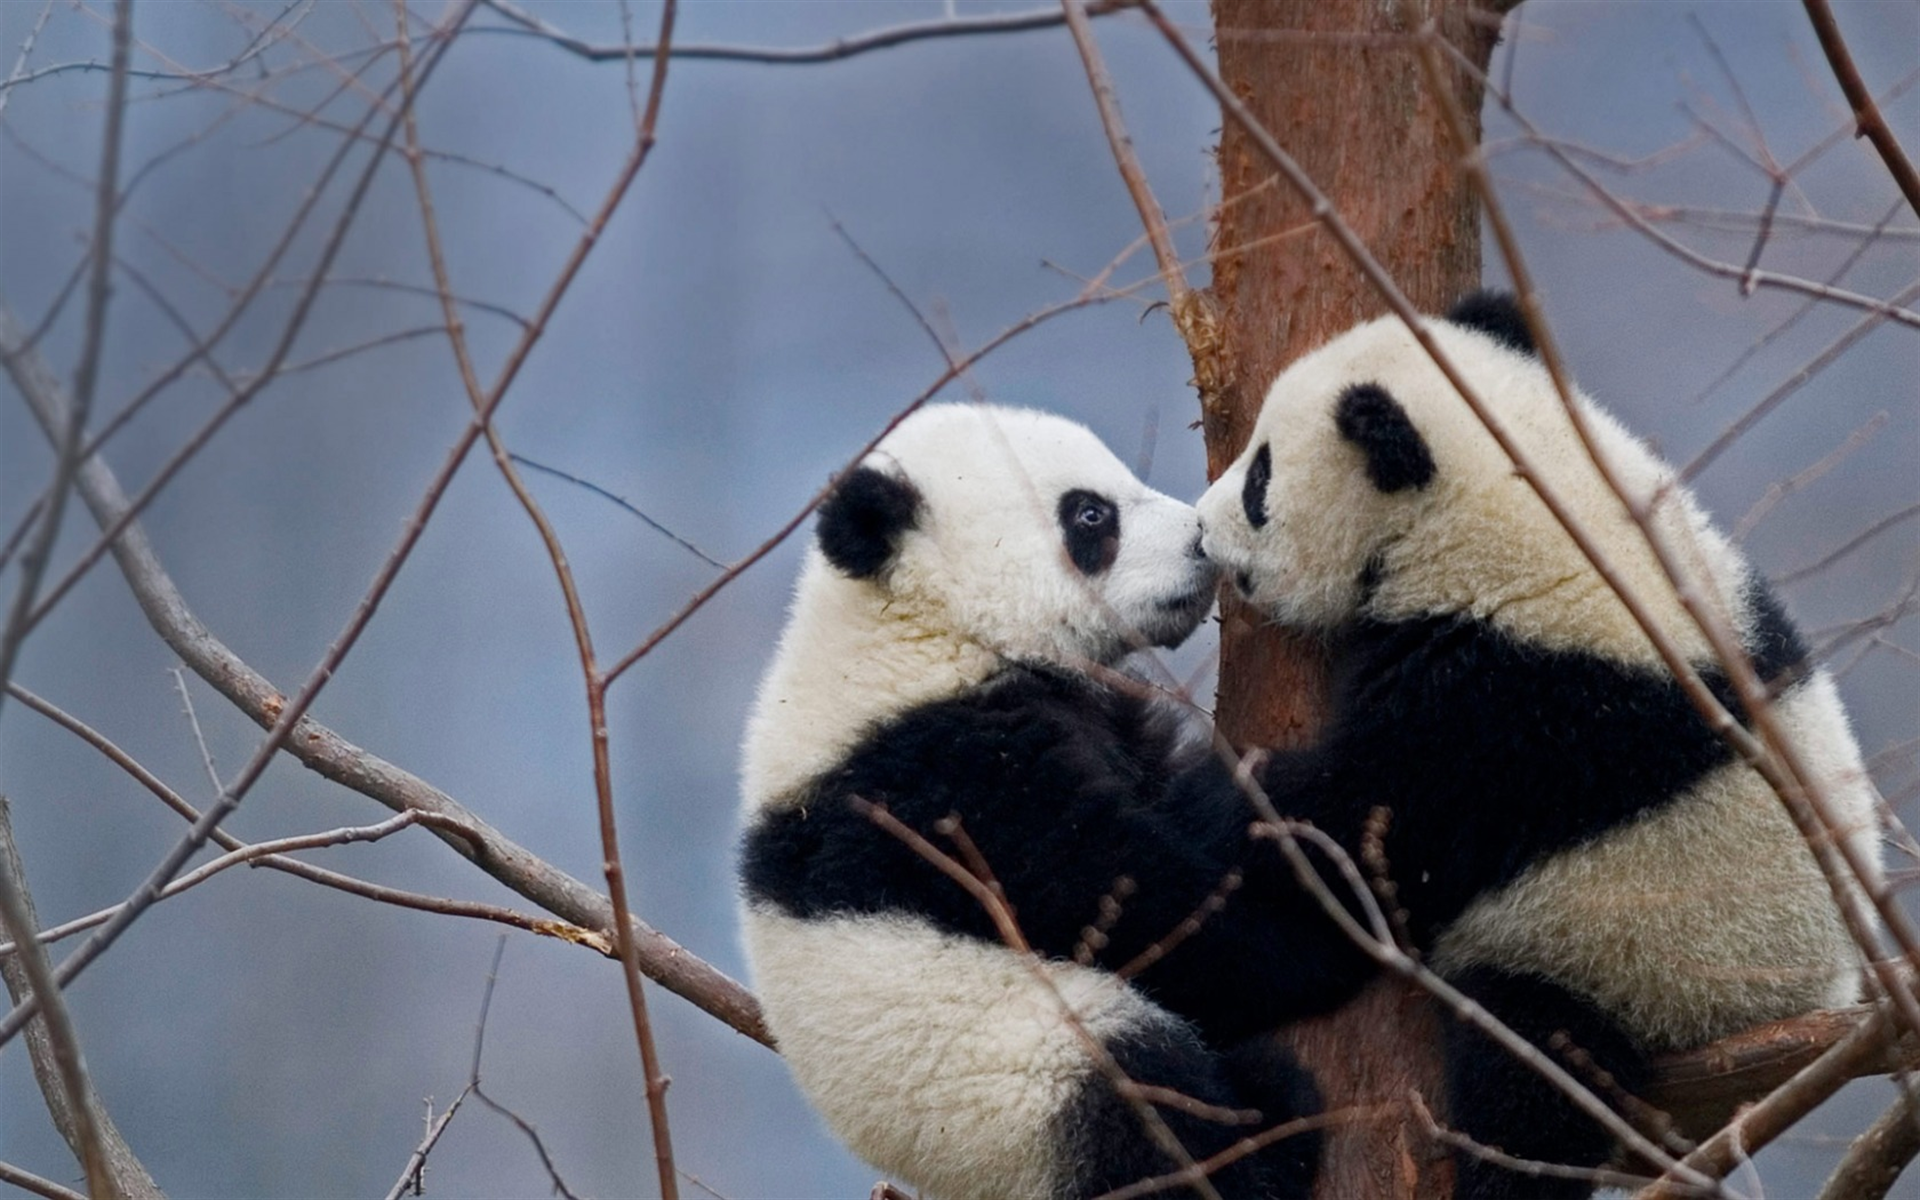 Download wallpaper pandas, couple, forest, pandas on the tree, cute bears, China, Tibet, Wolong National Nature Reserve, wildlife for desktop with resolution 1920x1200. High Quality HD picture wallpaper